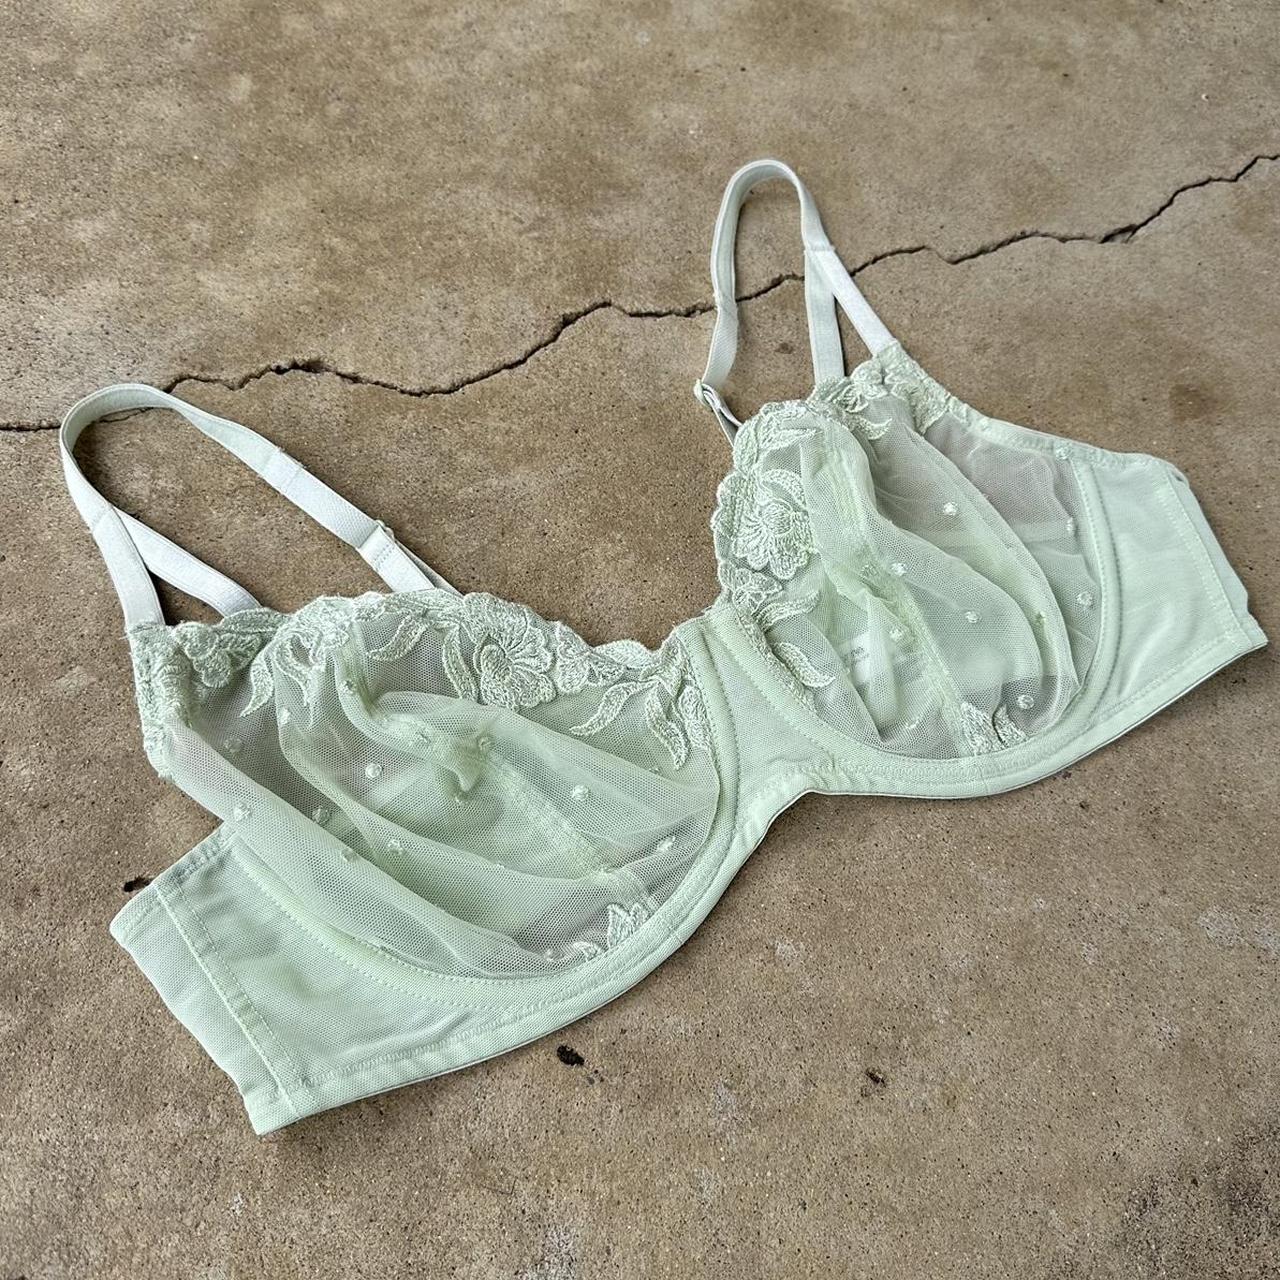 Four 36D bras (tan one is a push-up). Barely worn, - Depop